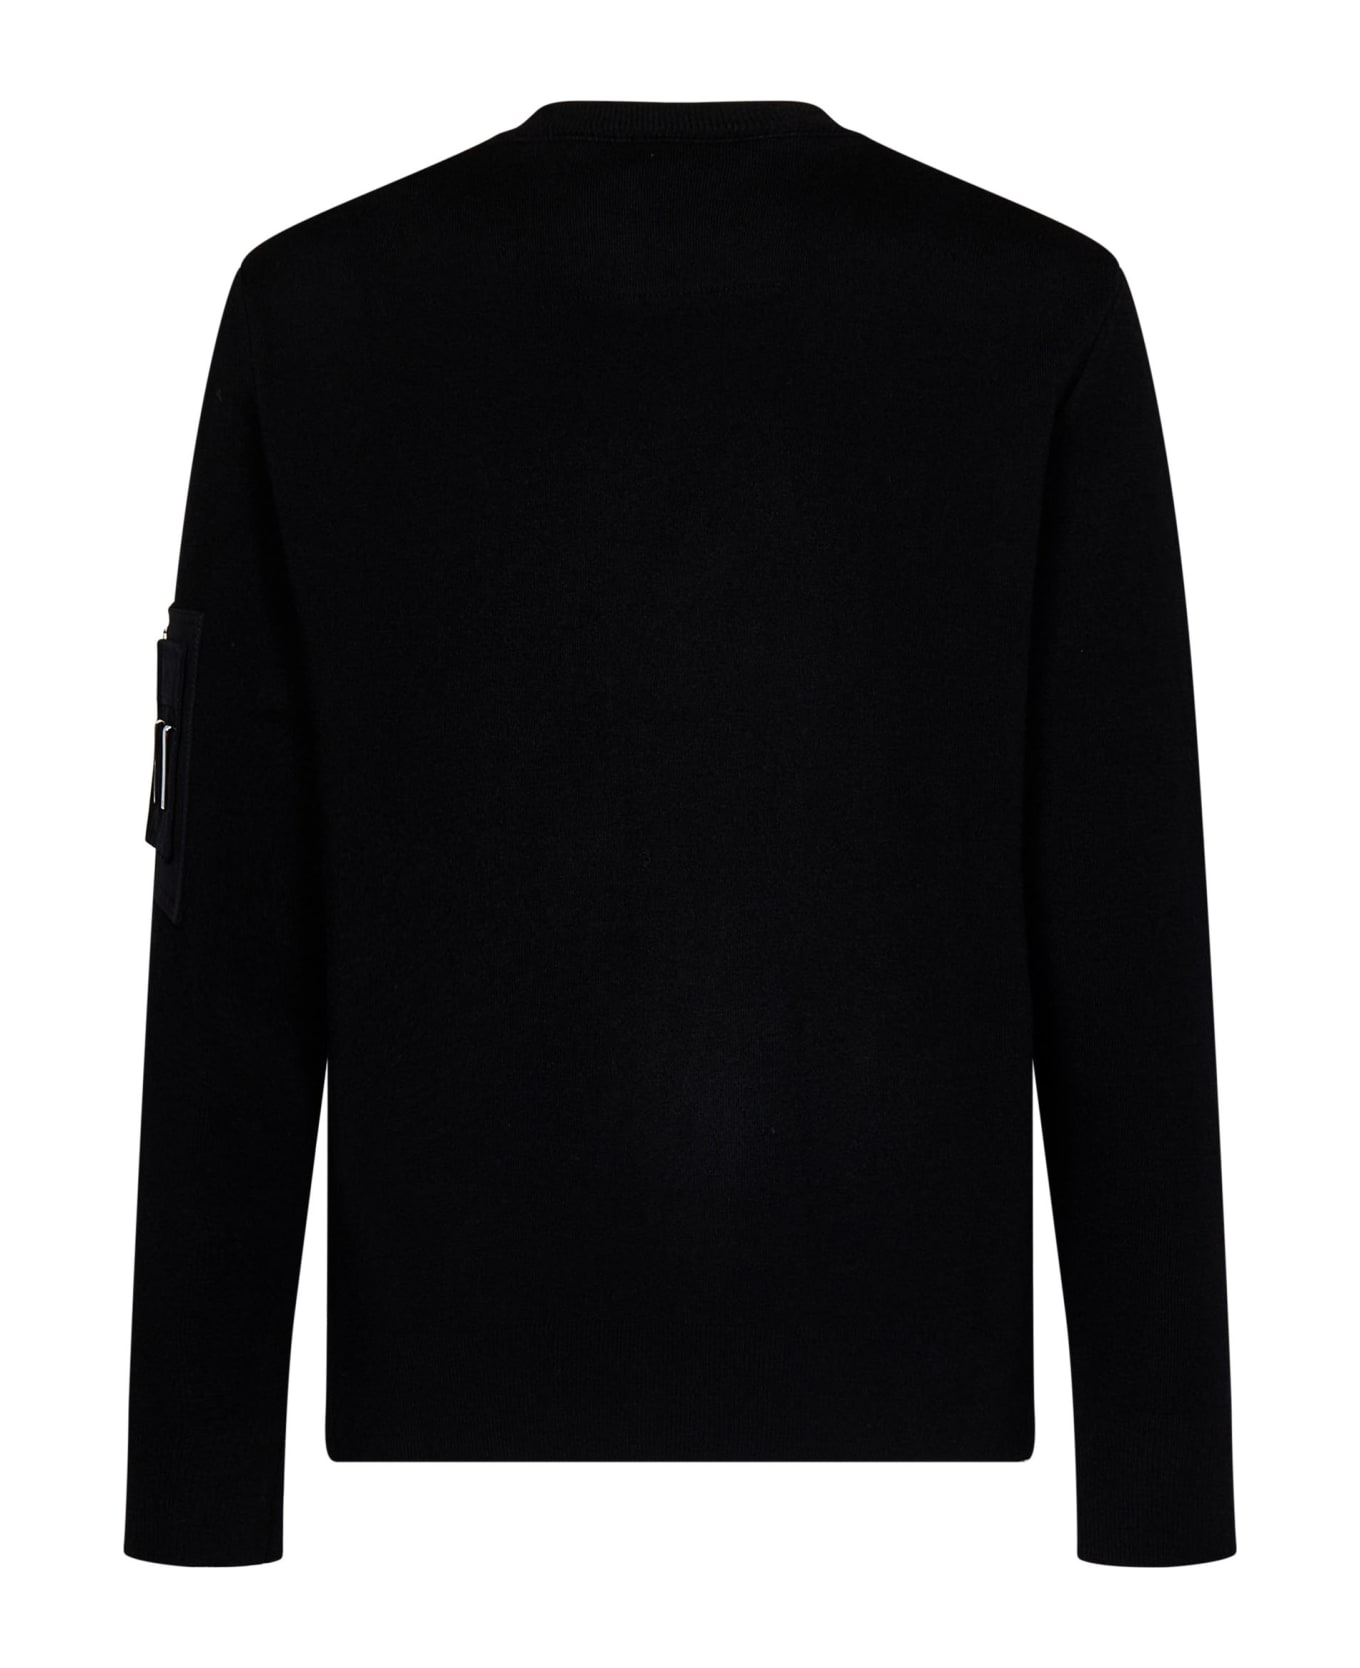 Givenchy Wool Sweater - Black